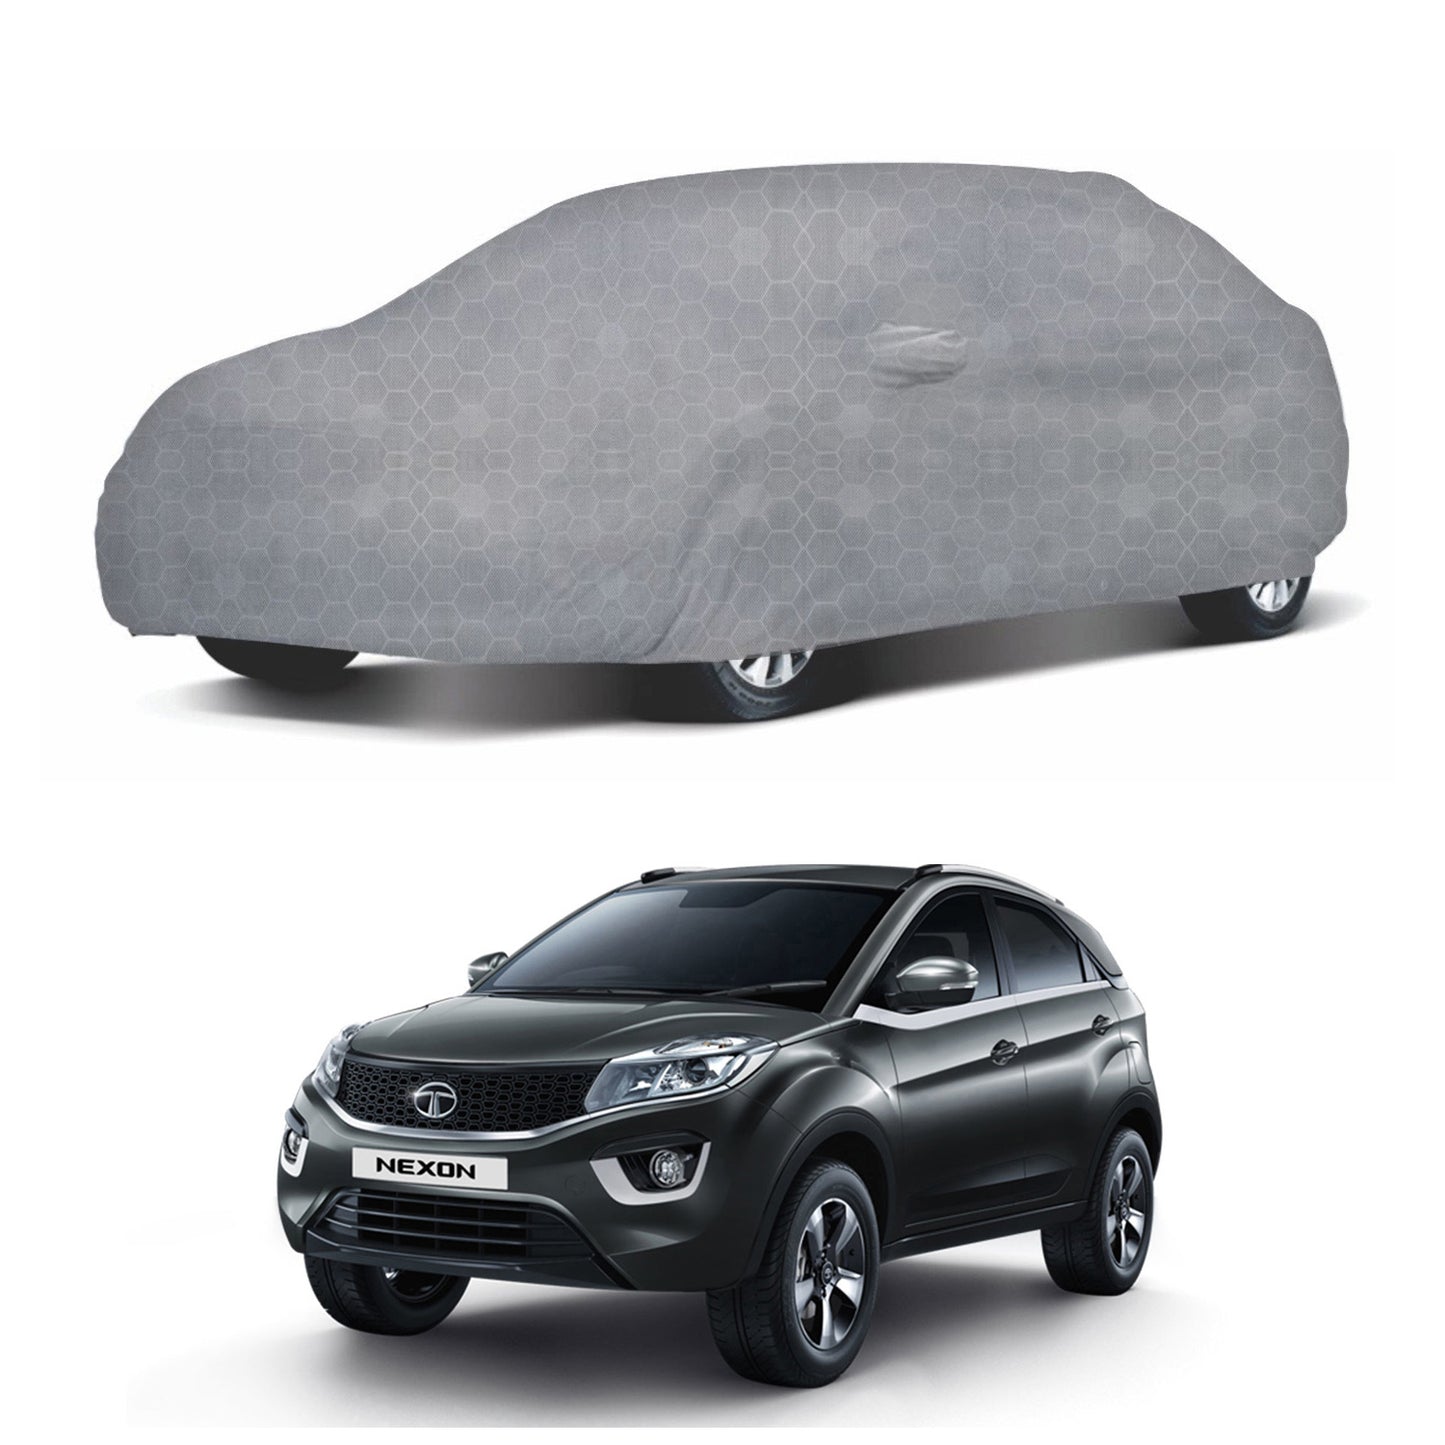 Oshotto 100% Dust Proof, Water Resistant Grey Car Body Cover with Mirror Pocket for Tata Nexon